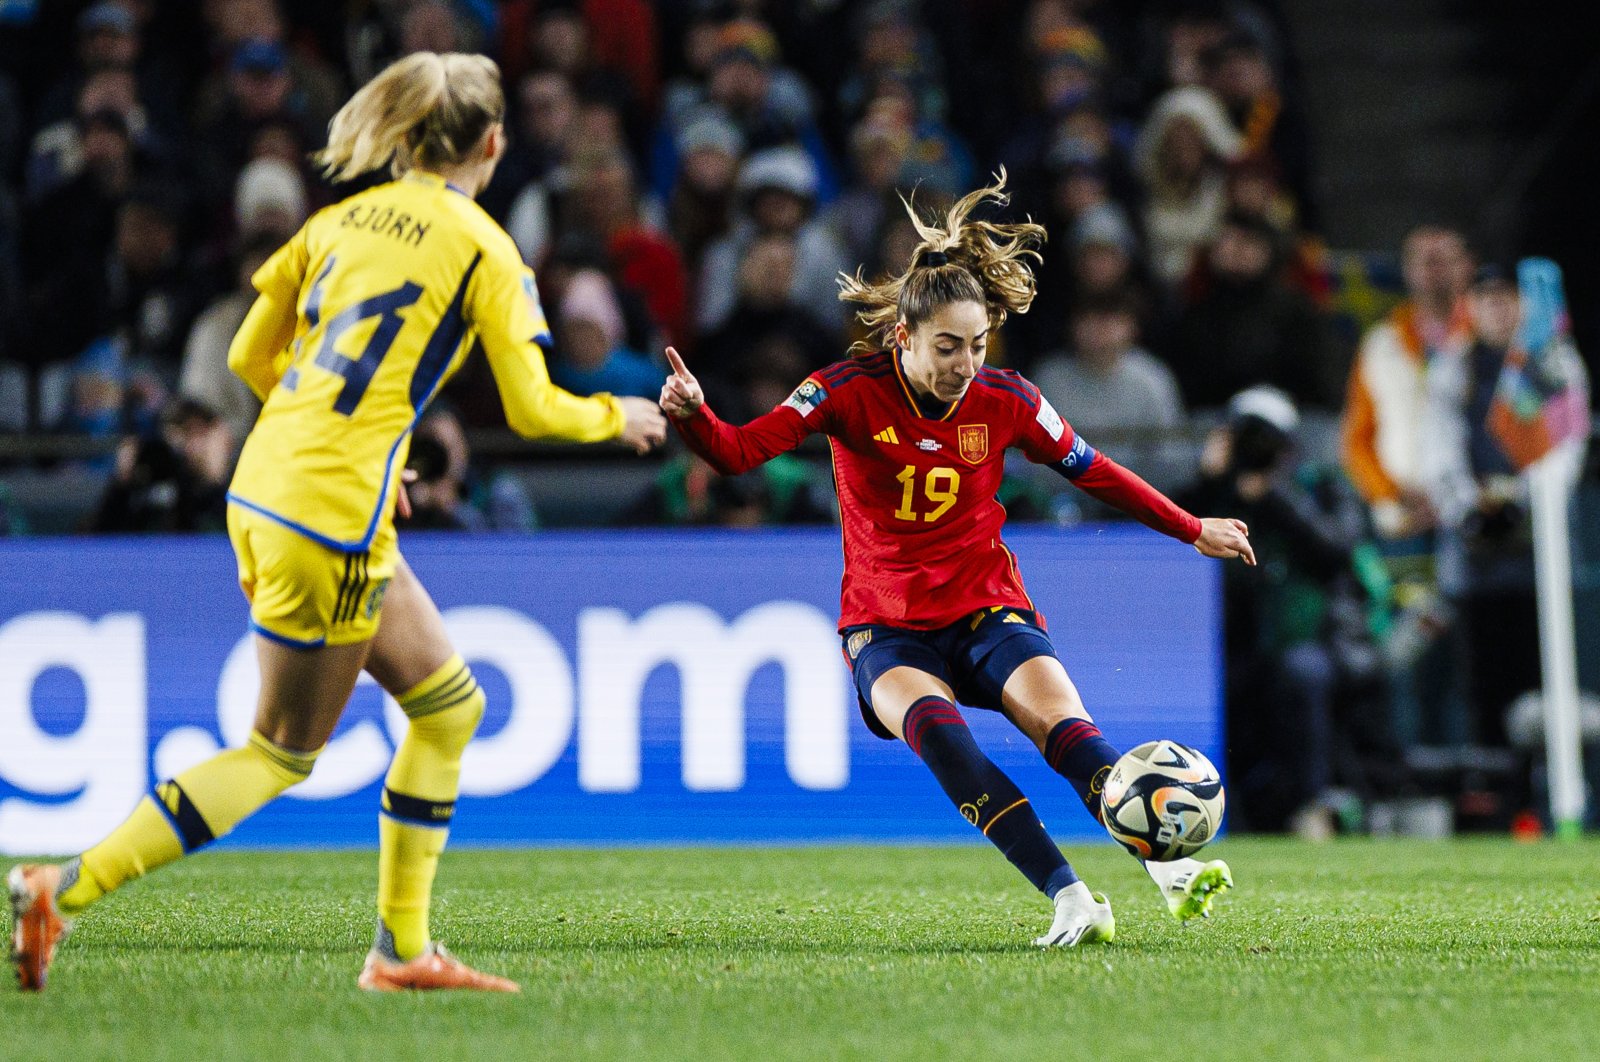 Spain&#039;s Olga Carmona (R) attempts a kick while being defended by Sweden&#039;s Nathalie Bjorn(L) during the Women&#039;s World Cup semifinal match at Eden Park, Auckland, New Zealand, Aug. 15, 2023. (Getty Images Photo)